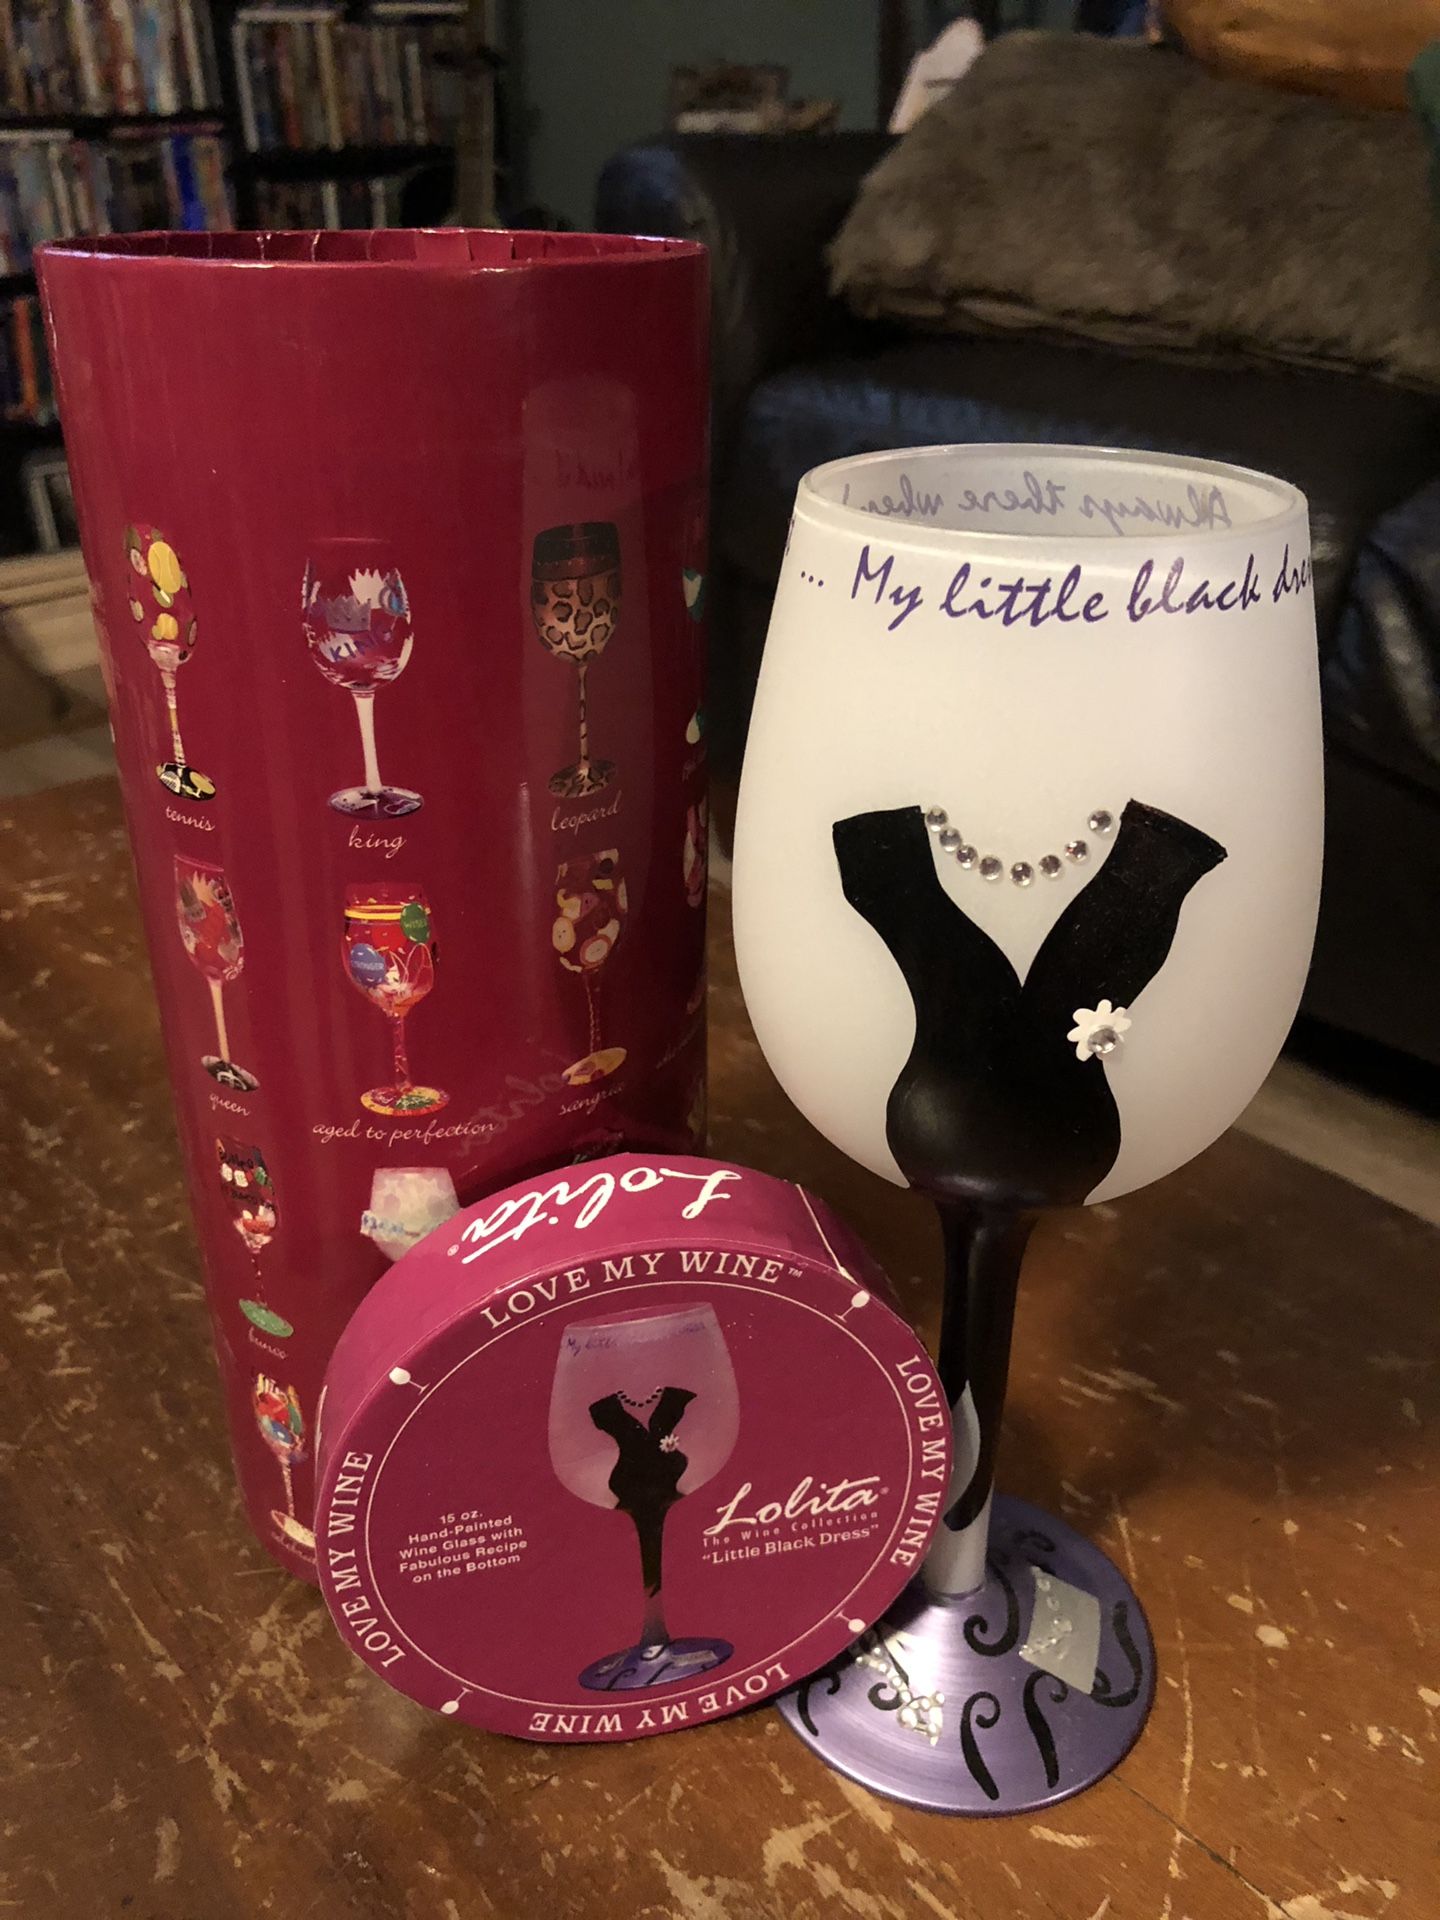 “Little Black Dress” hand painted wine glass. Cute for a party or to use for some fun at home. Comes in sturdy, decorated container for safe storage